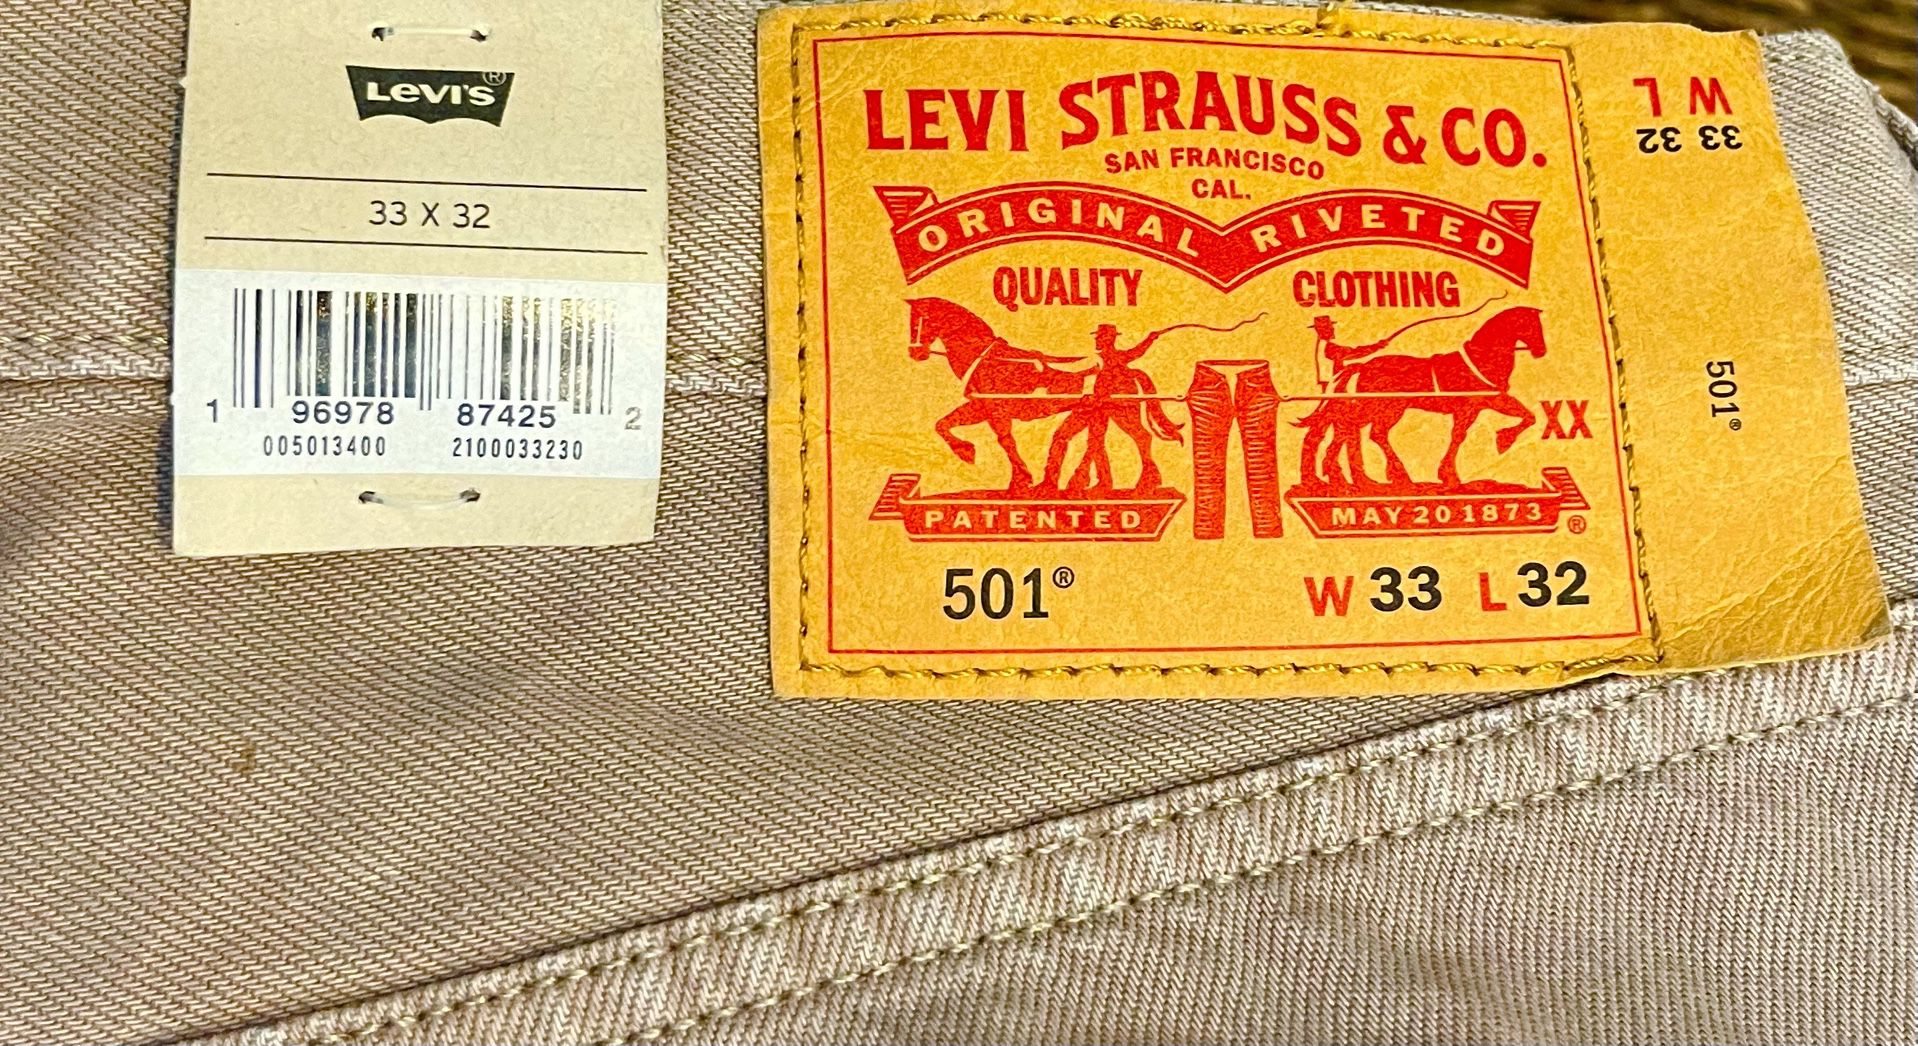 Brand New With Tags 501 Levi’s W33 L32 